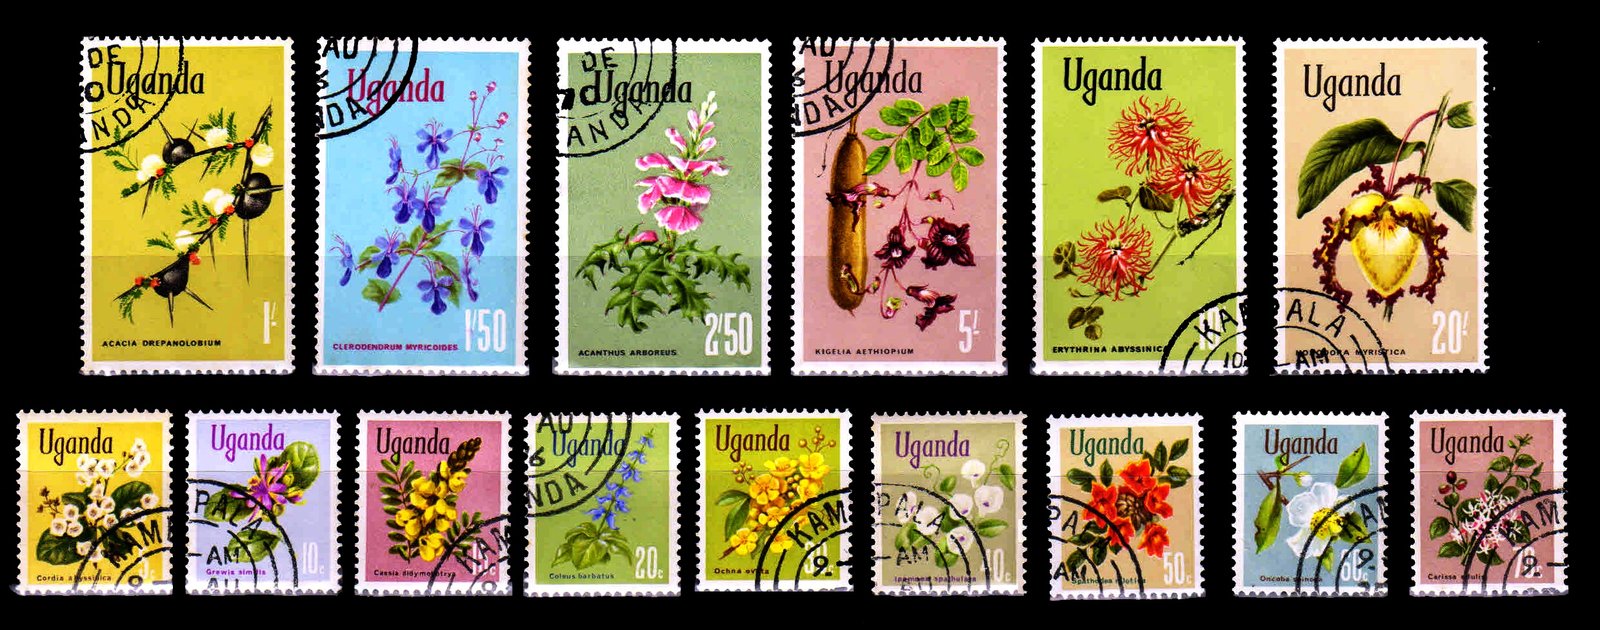 UGANDA 1969 - Flowers, Complete Set of 15, Used Stamps. S.G. 131a-145. Cat � 13